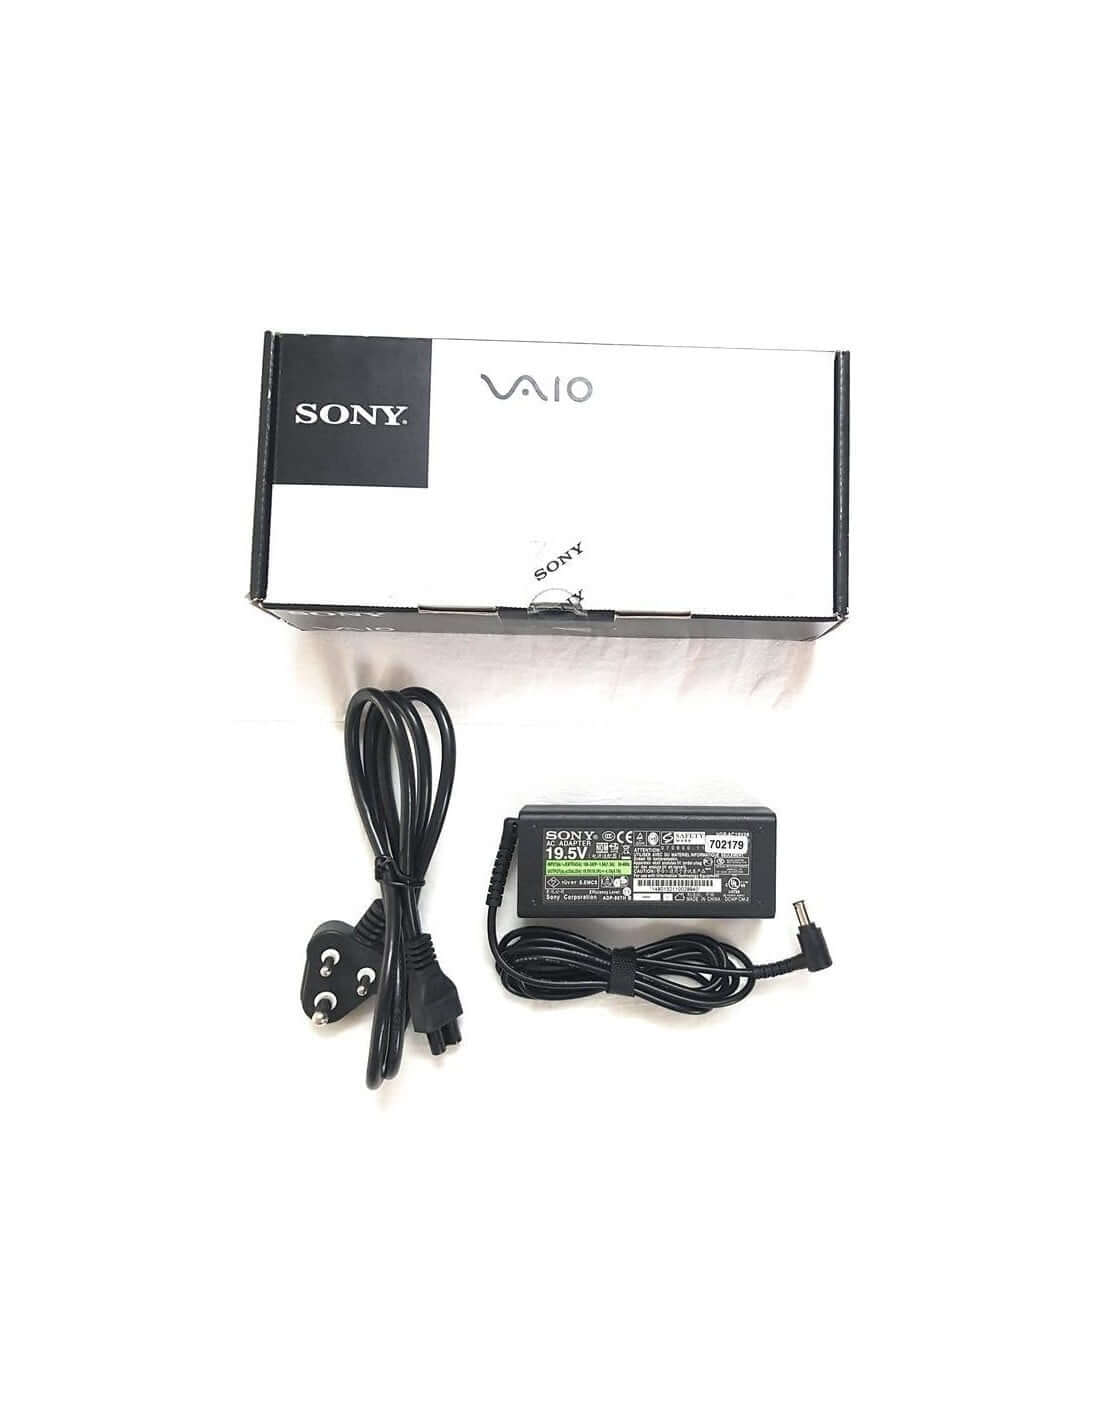 SONY VAIO 75w Original Laptop Charger - 19.5V 3.9A Genuine AC Power Adapter ( 6.5mm * 4.4mm)  BPS34